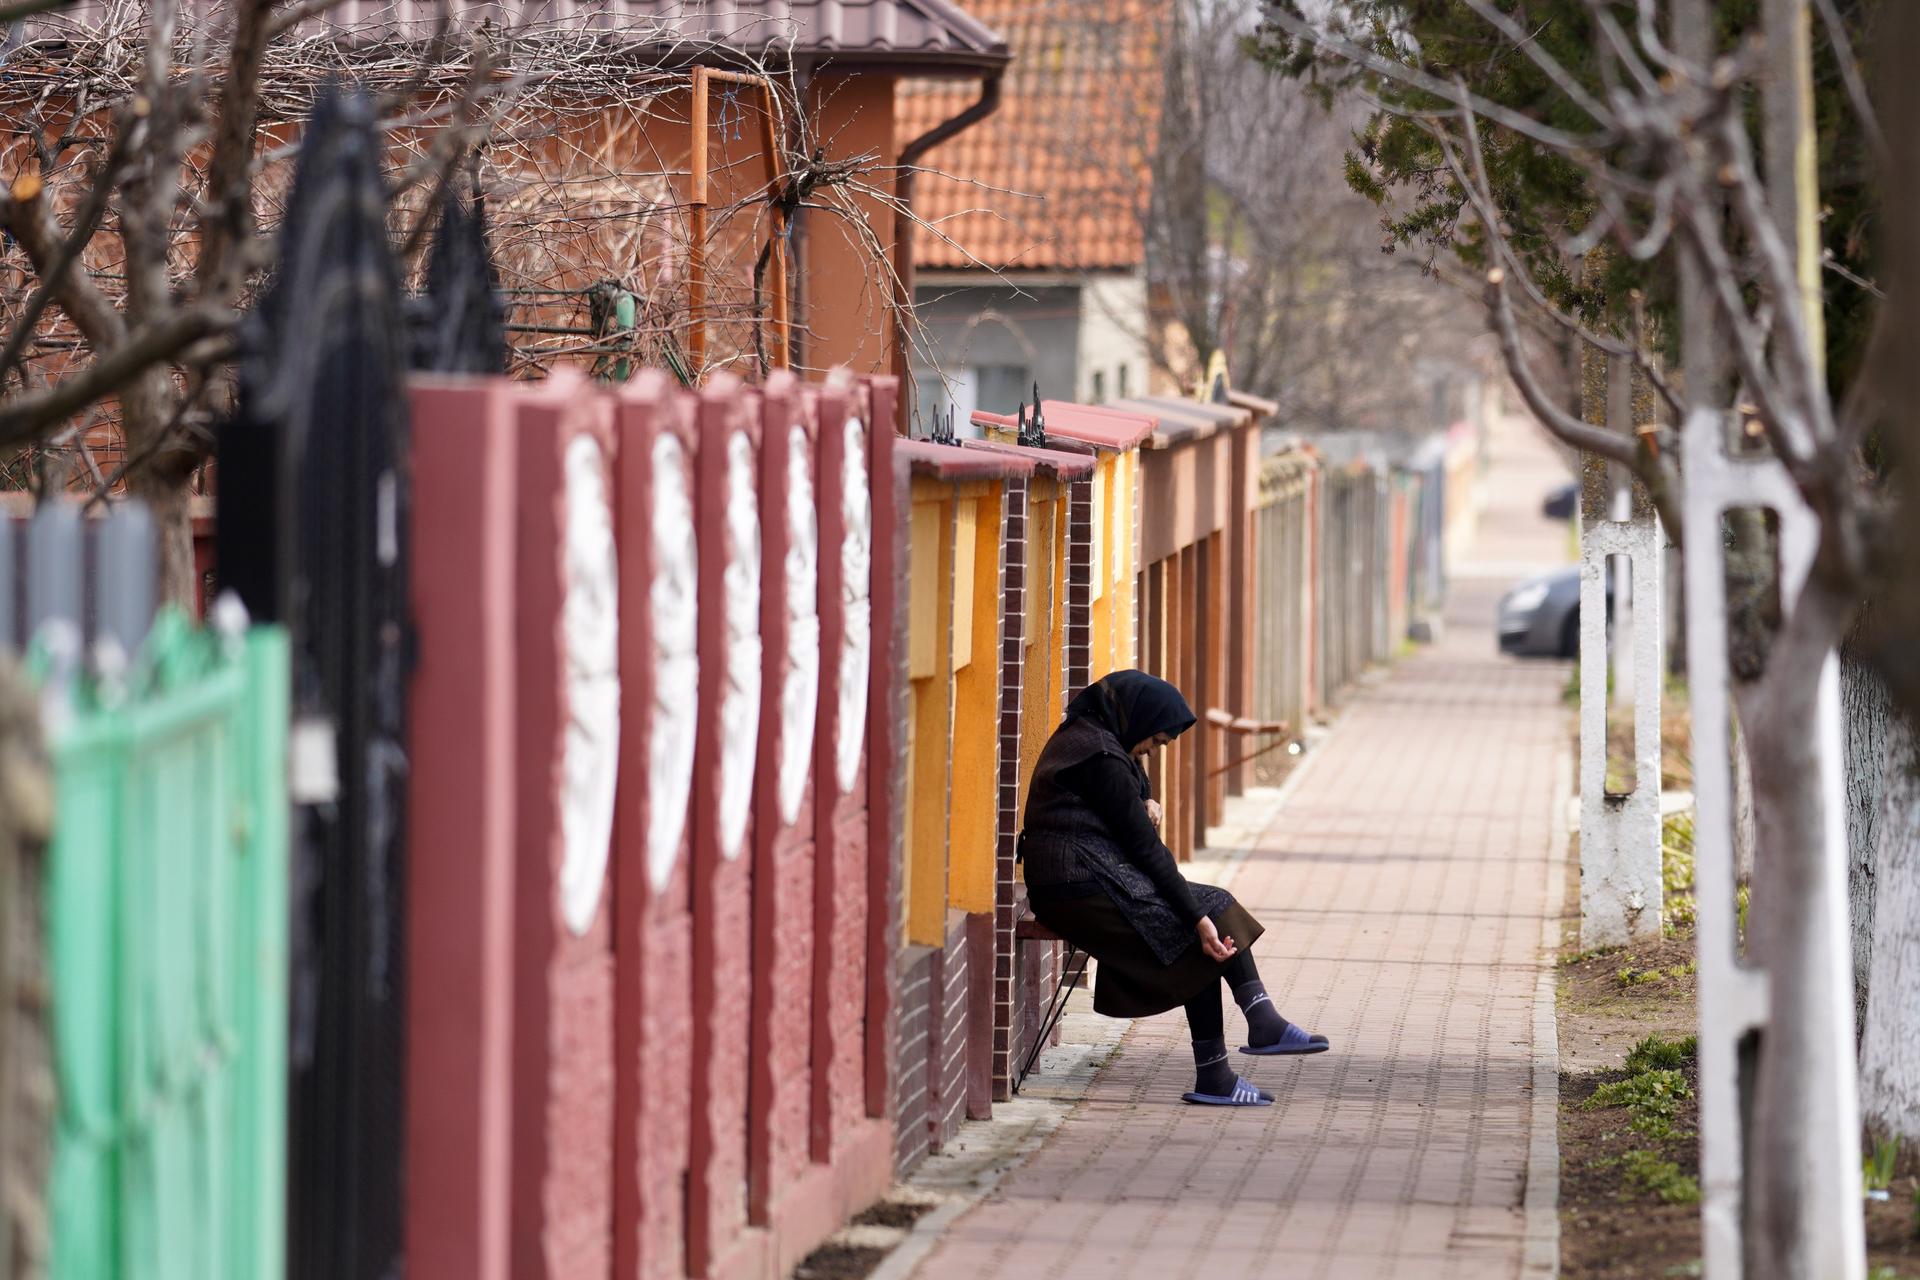 A woman sits outside her home in the village of Deveselu. Like many rural Romanian towns, the population is largely elderly people and their grandchildren. Many working-age adults have moved to western Europe for work.